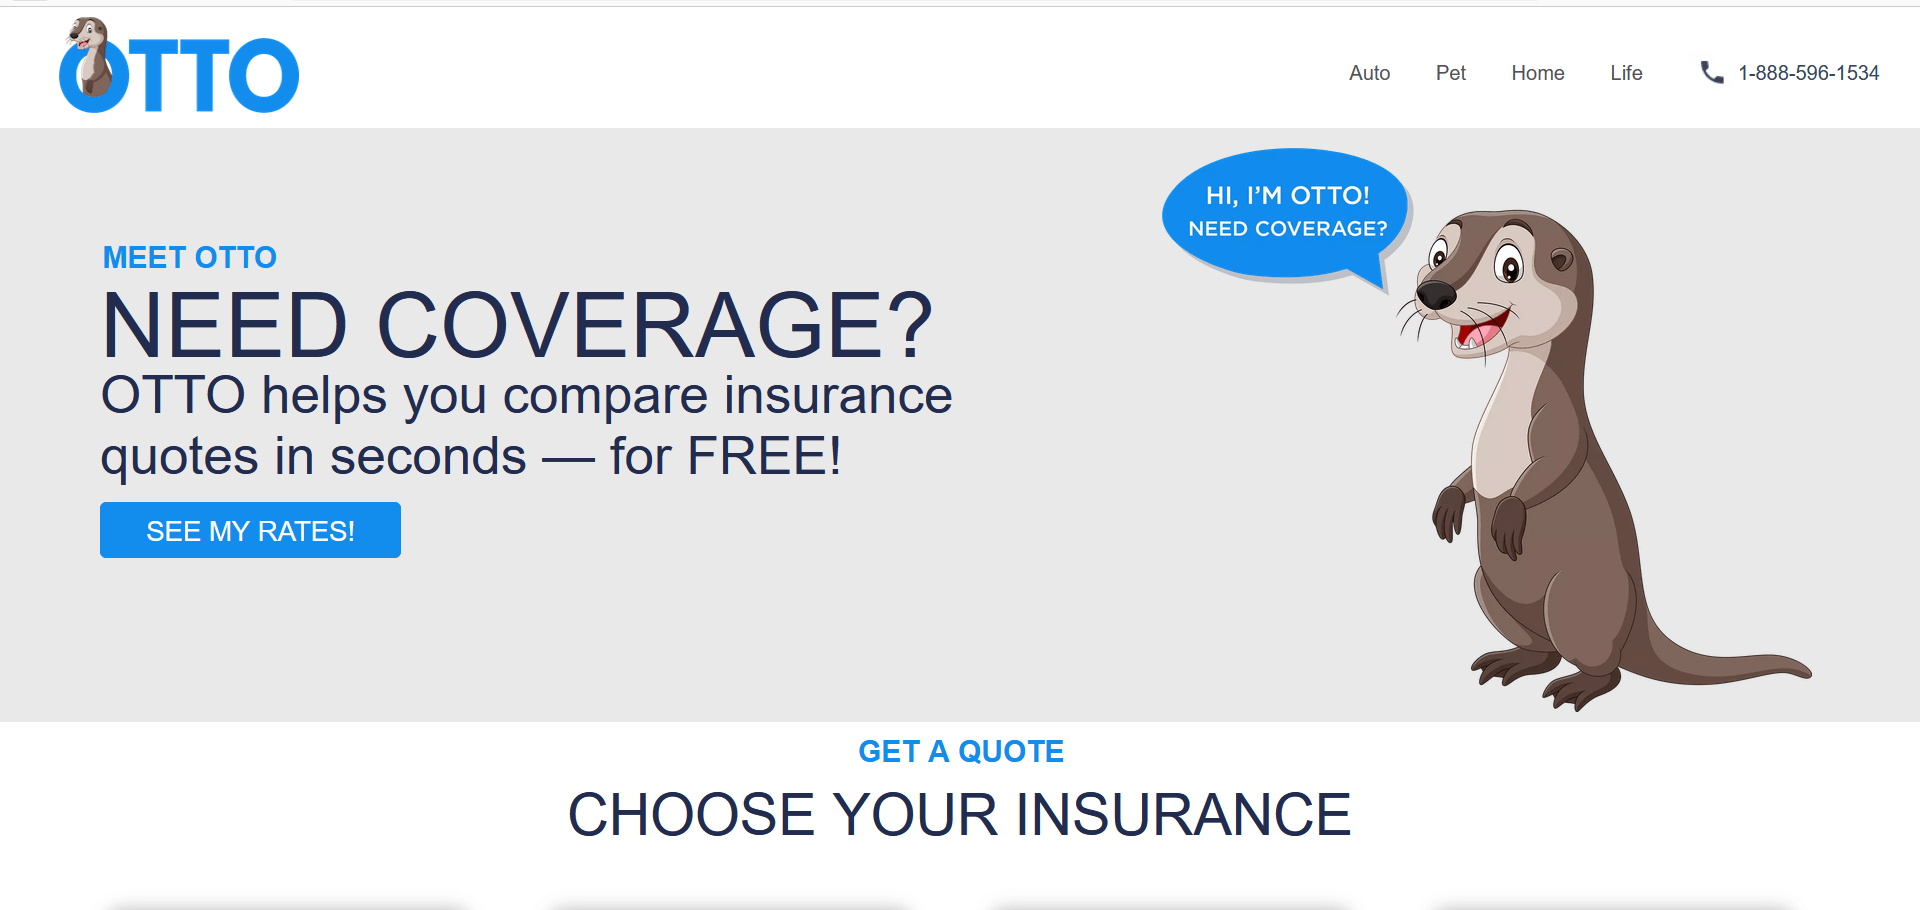 Is Otto Insurance Legit & Safe? Or Is It A Scam? (2023 Update)